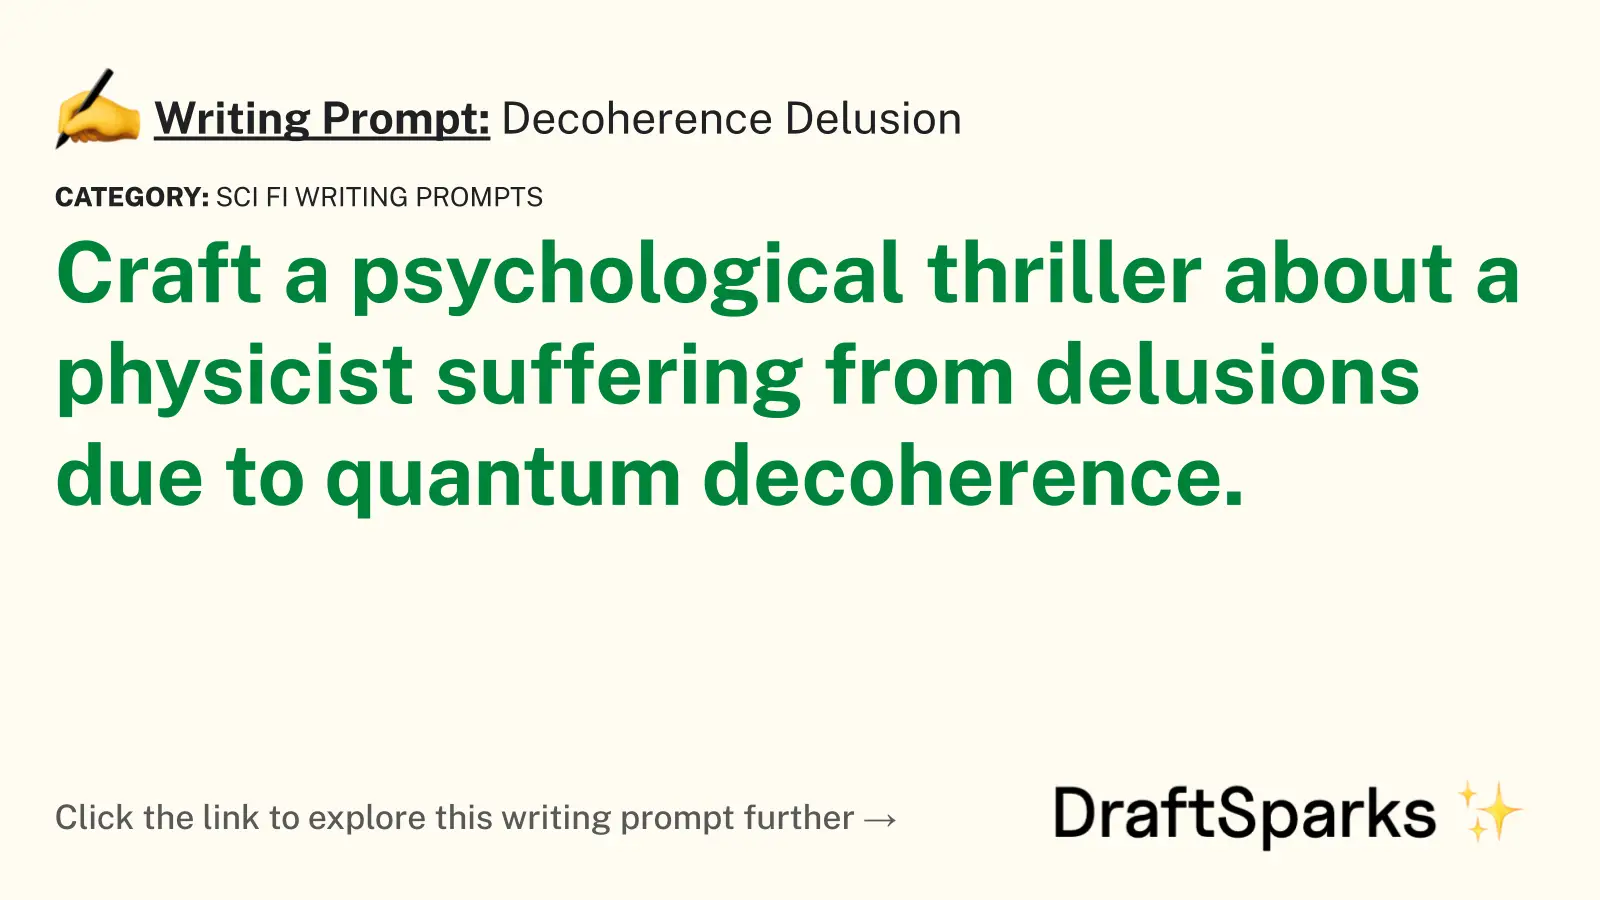 Decoherence Delusion